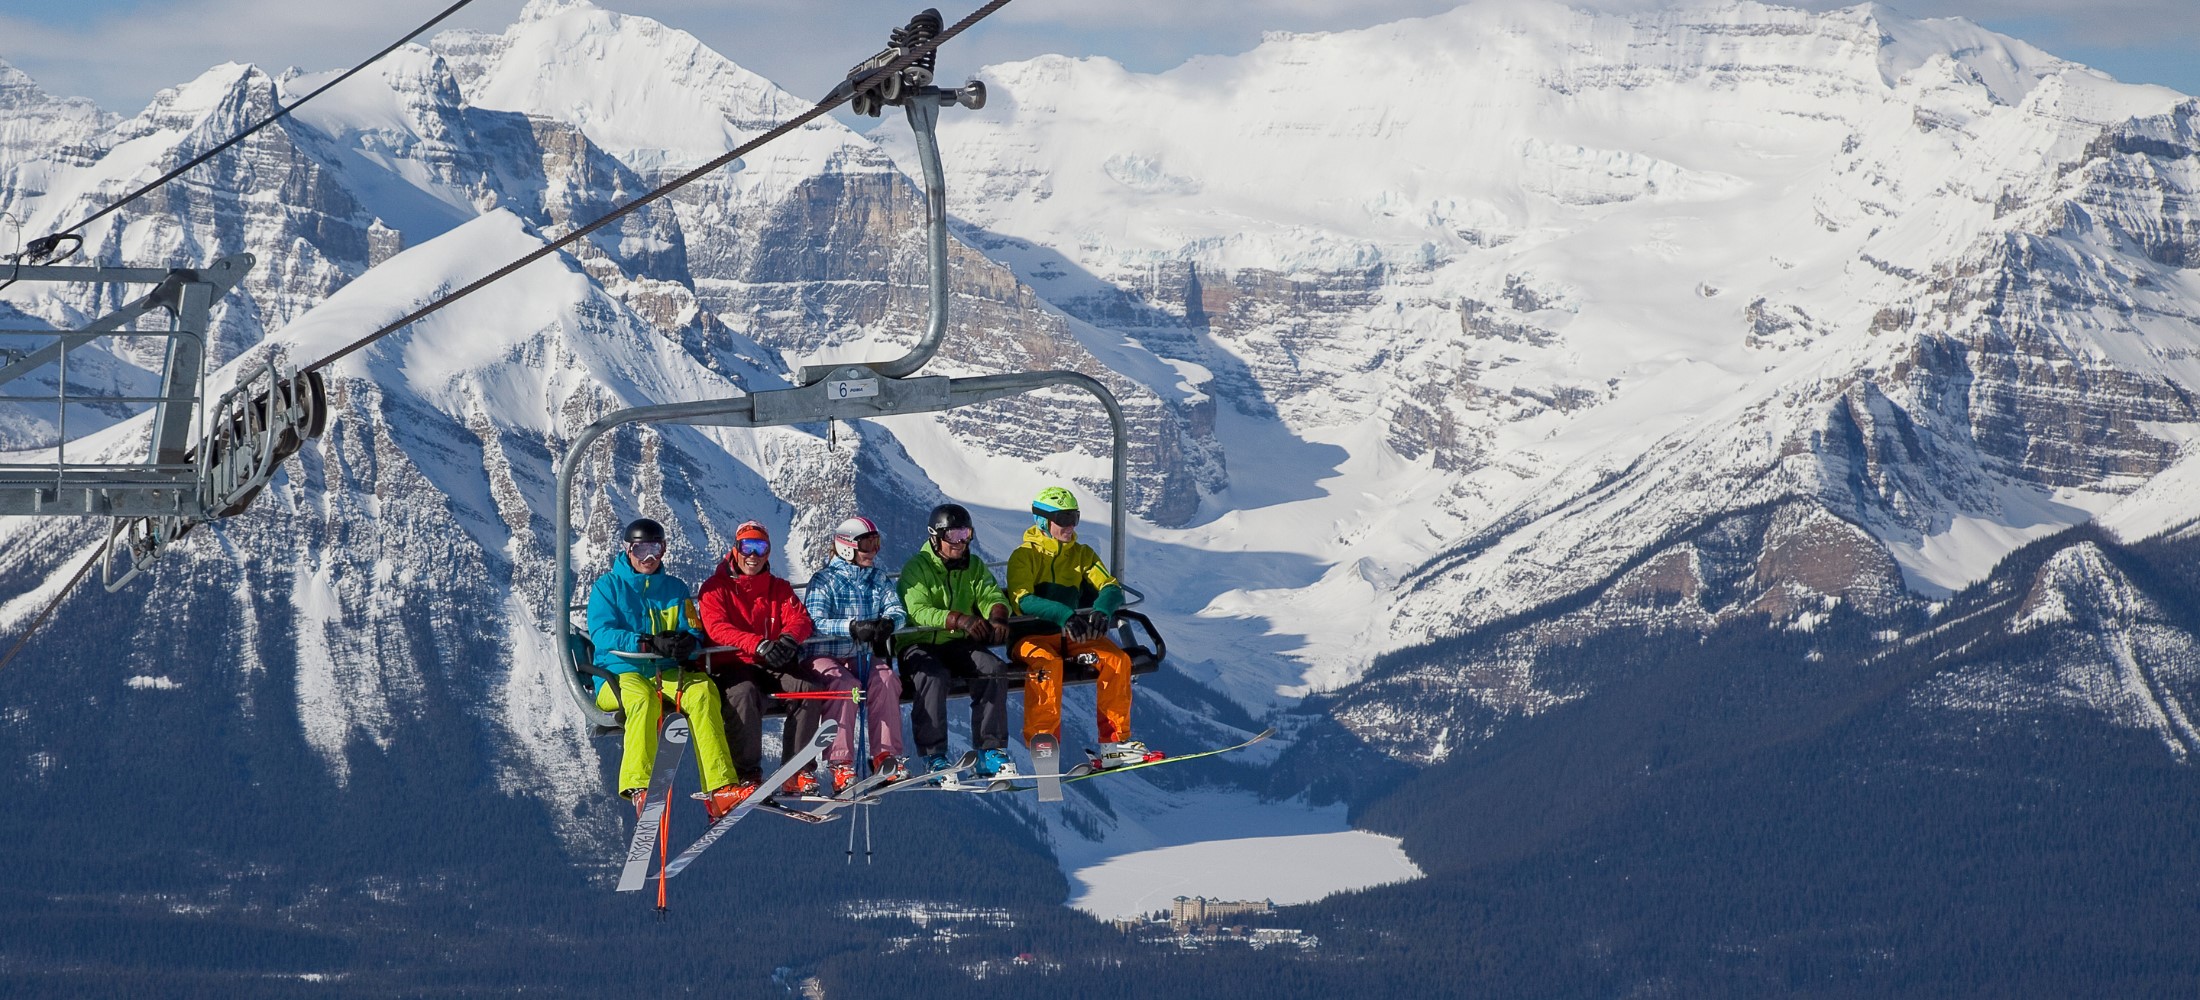 A group of friends on the chairlift at Lake Louise Ski Resort in Winter, Photo by Lake Louise Ski Resort & Chris Moseley